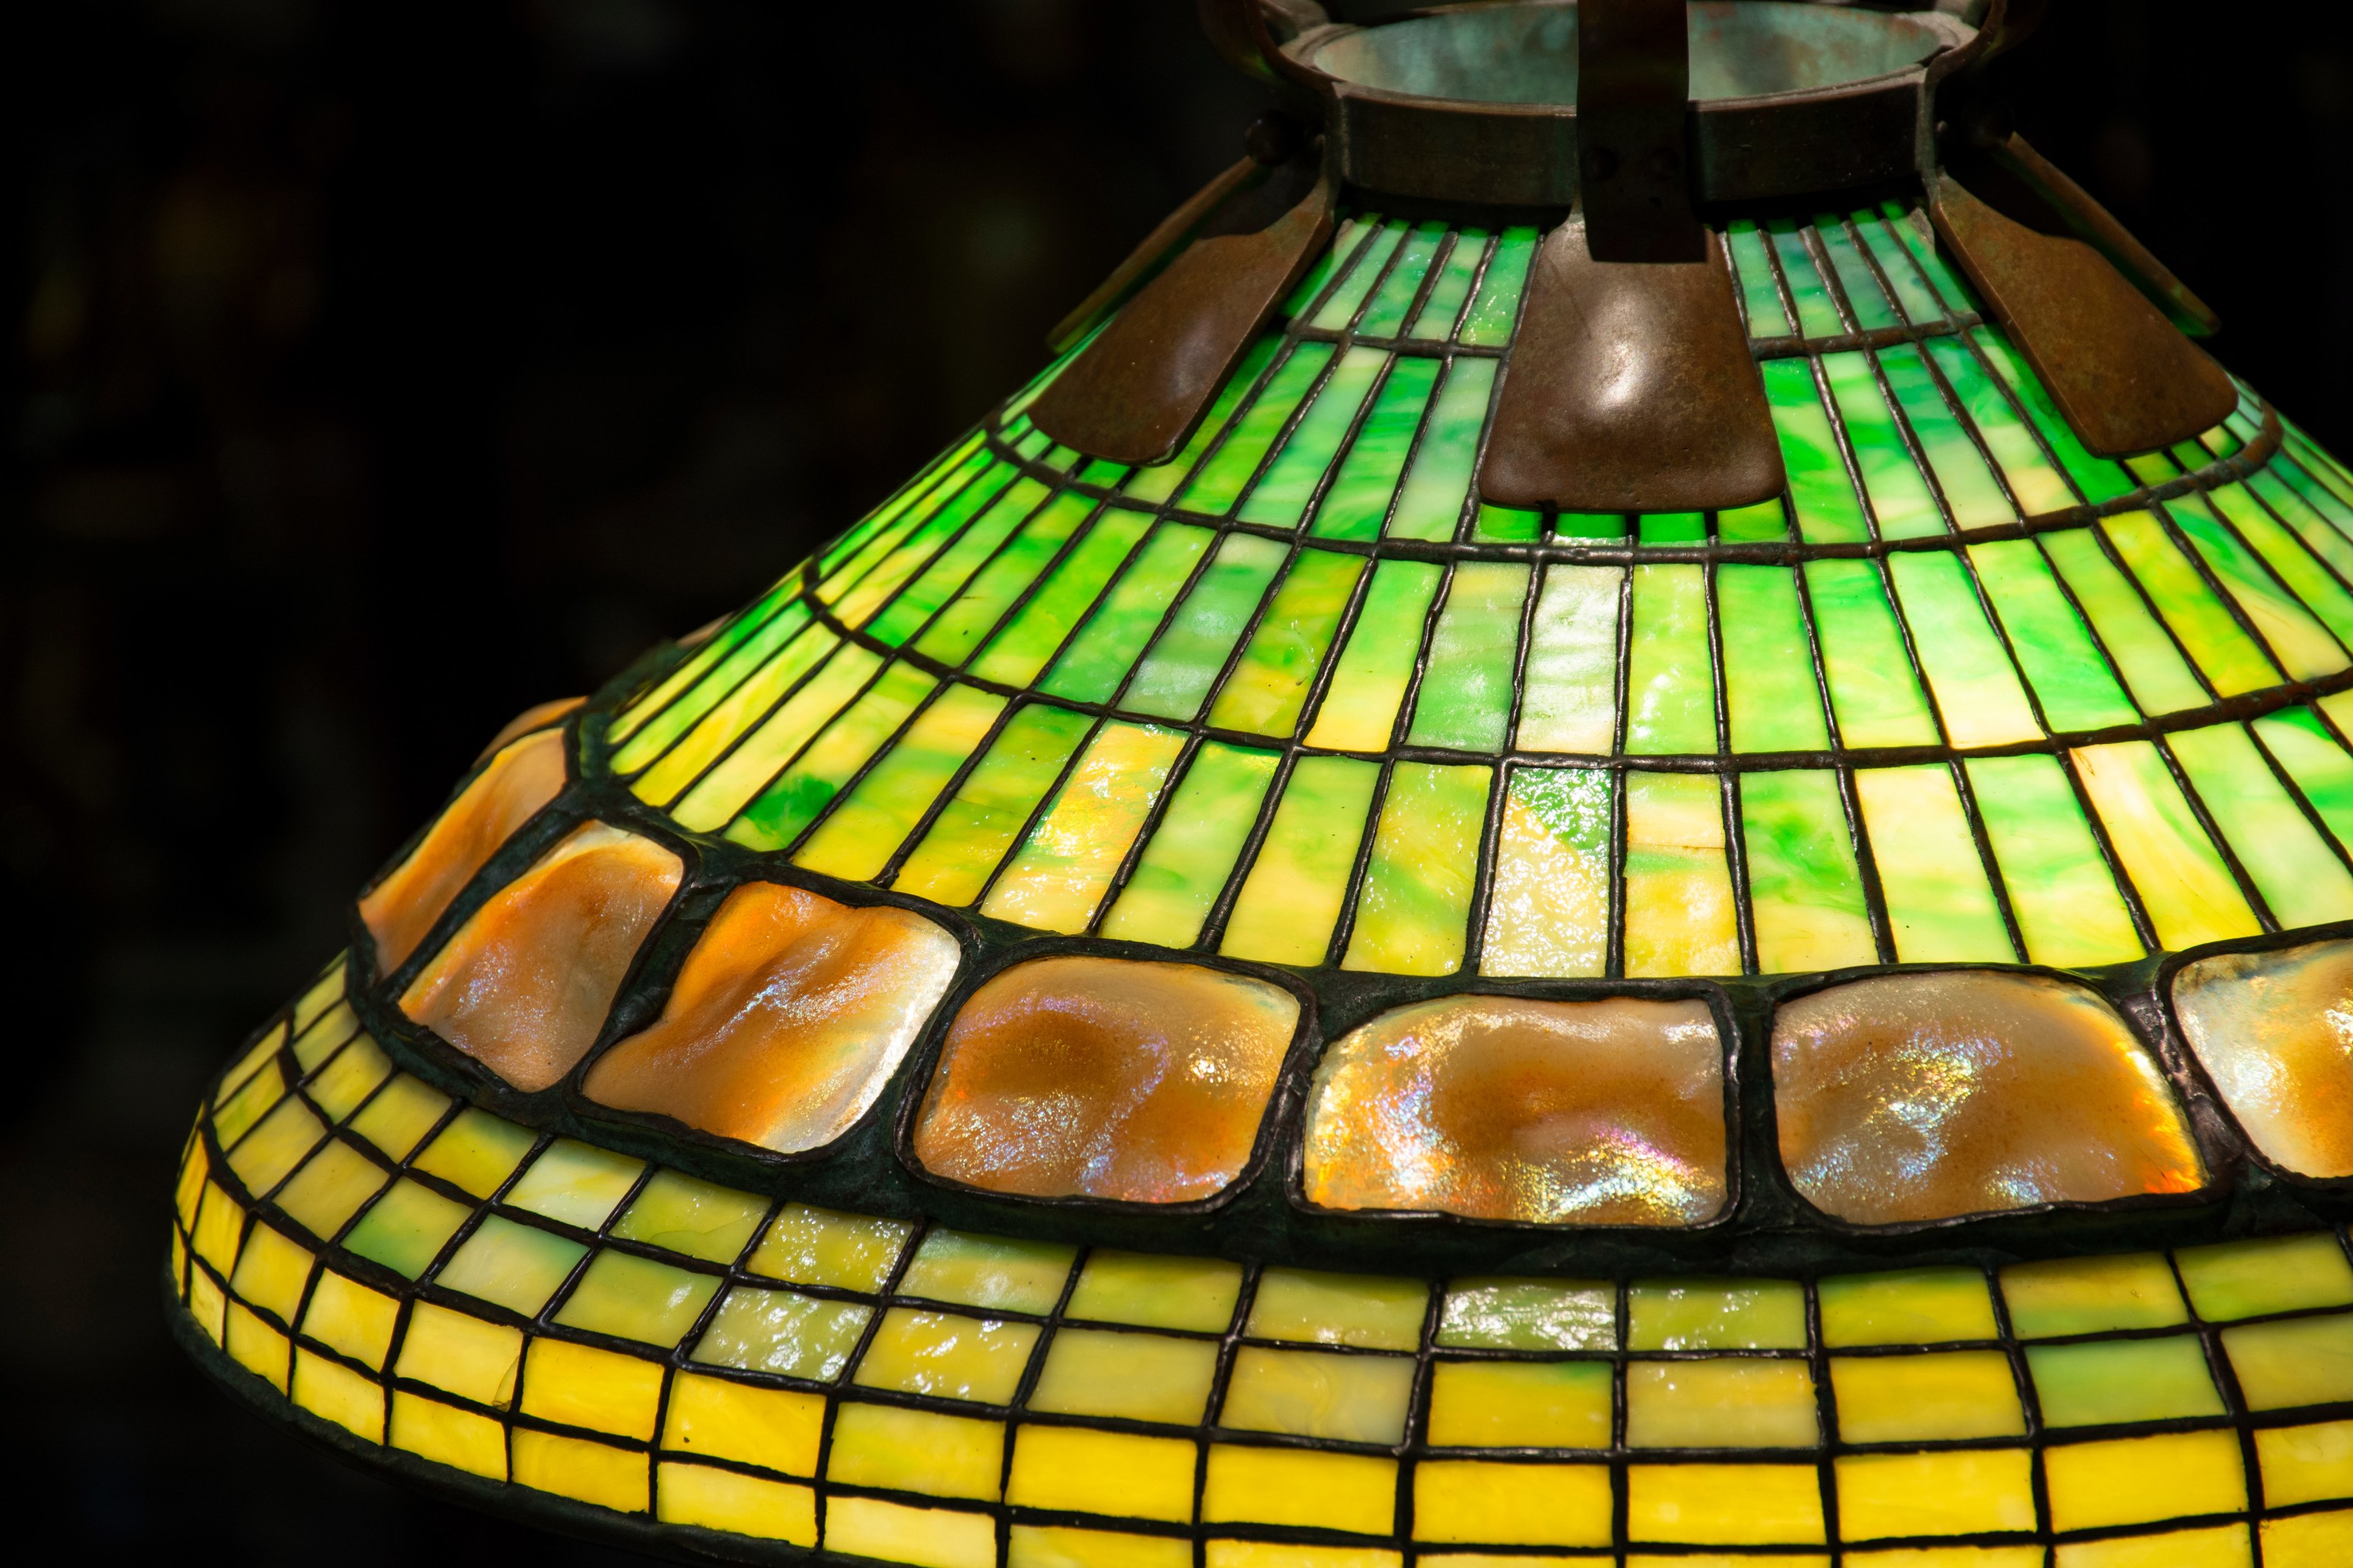 A detail shot showing the Tiffany Studios hanging turtle back shade, showcasing the leaded glass and irregular texture and iridescence of the favrile glass turtle back tiles